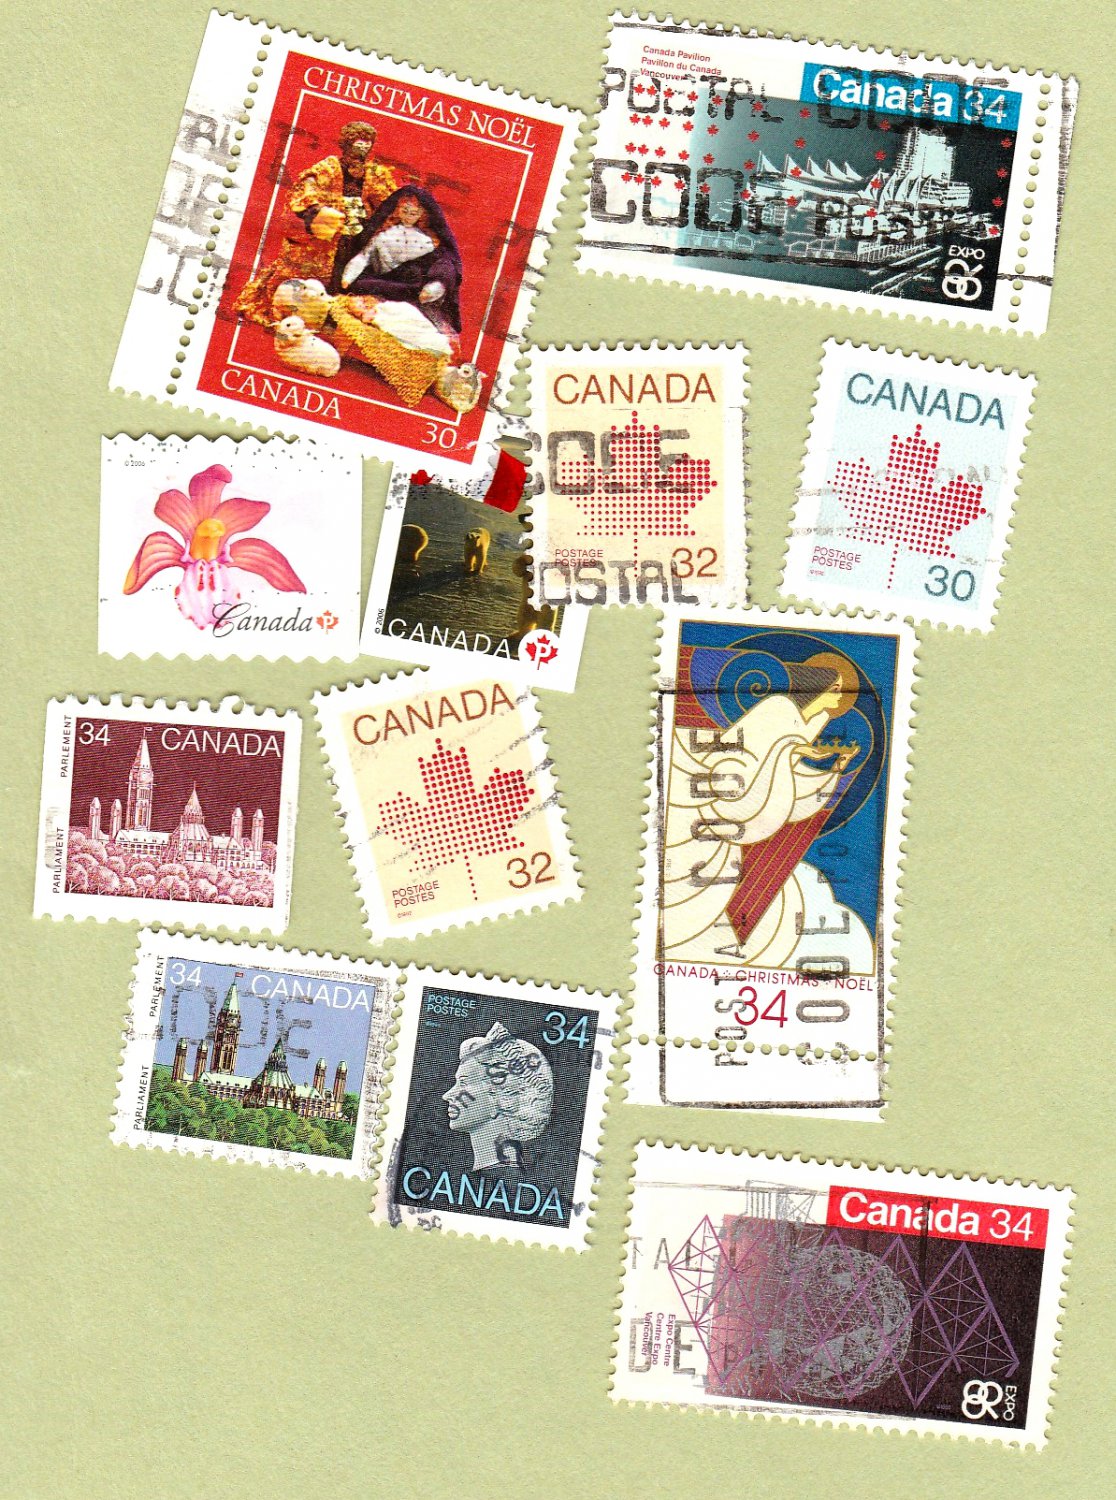 Canada Postage Stamps Assortment Lot of 12